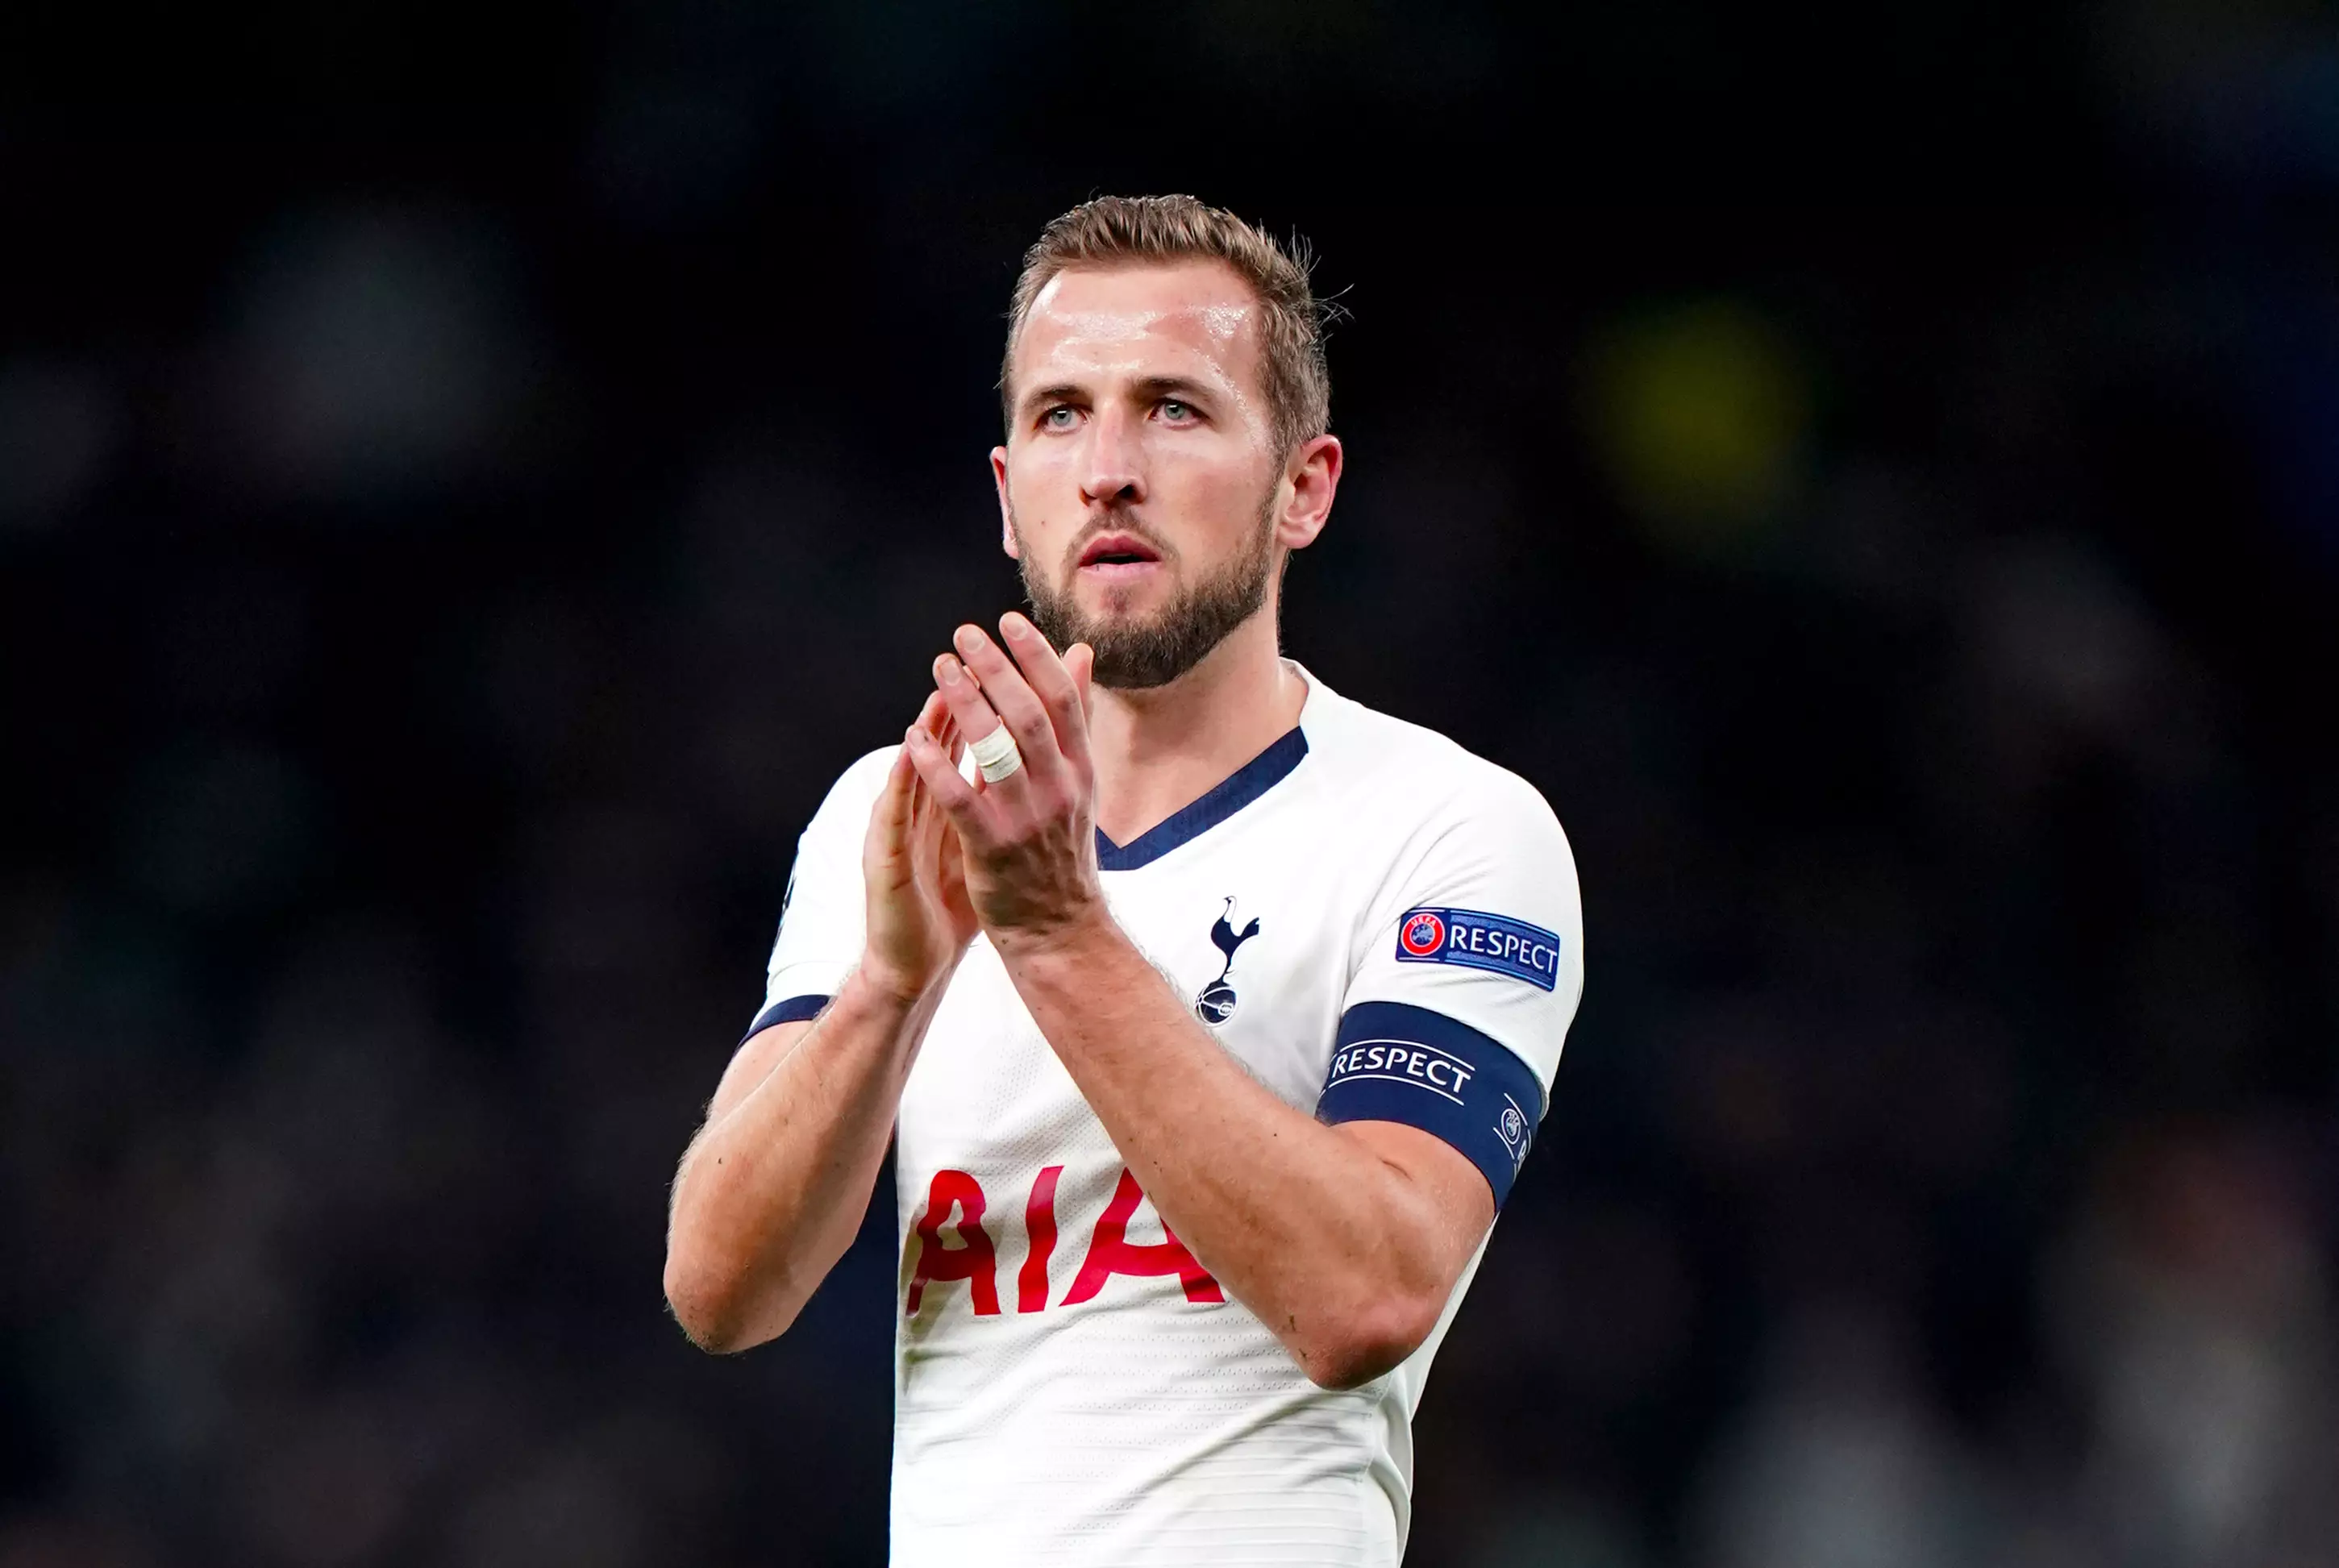 Kane helped get Spurs to a Champions League final. Image: PA Images